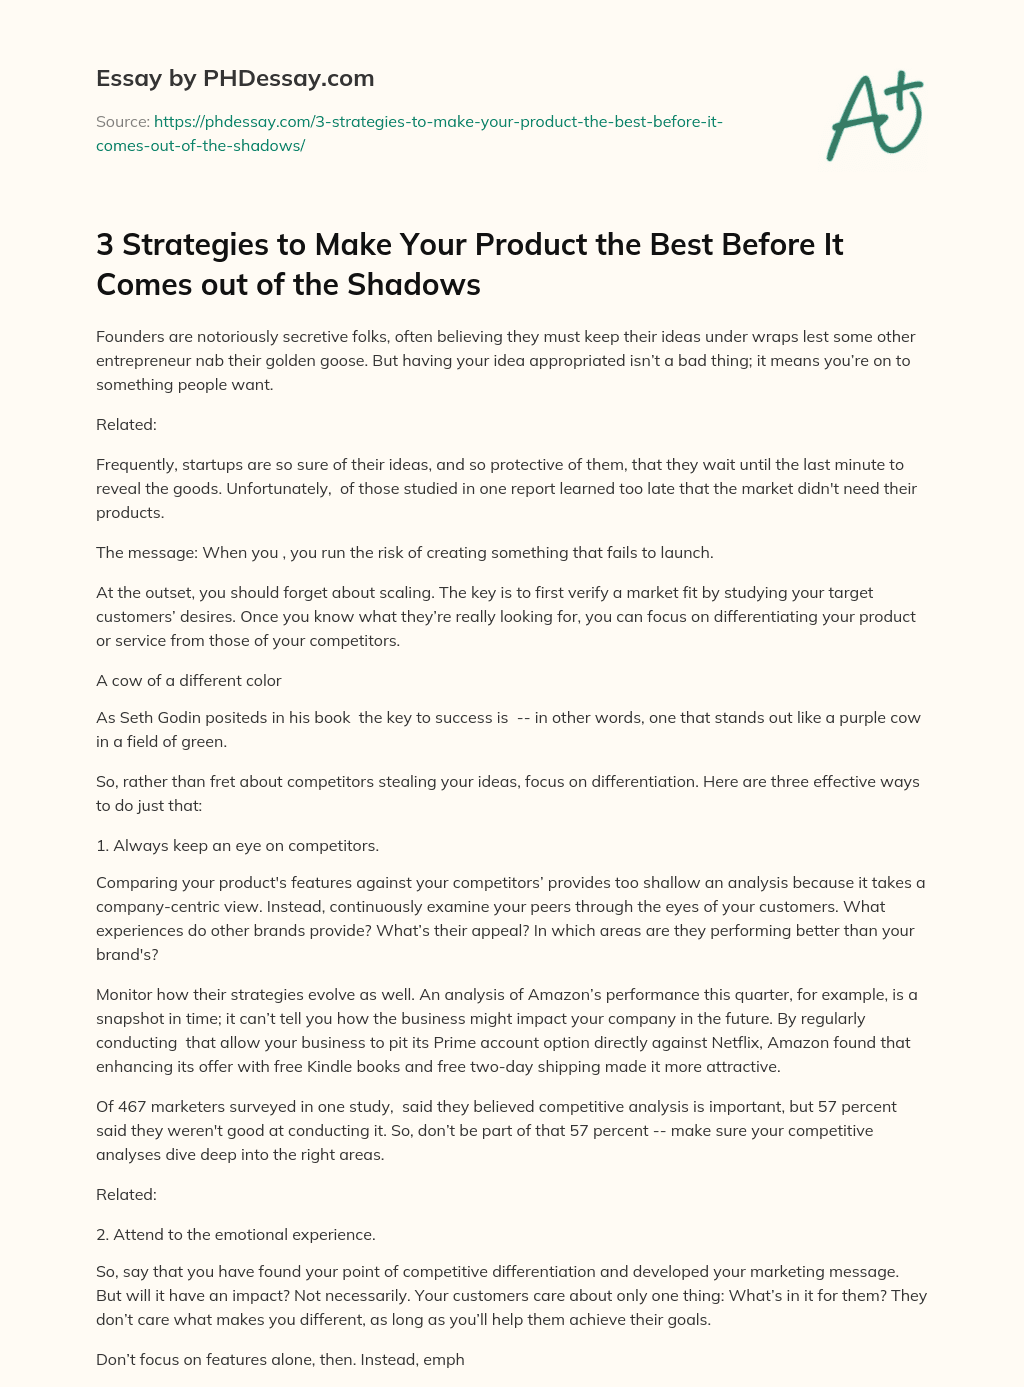 3 Strategies to Make Your Product the Best Before It Comes out of the Shadows essay